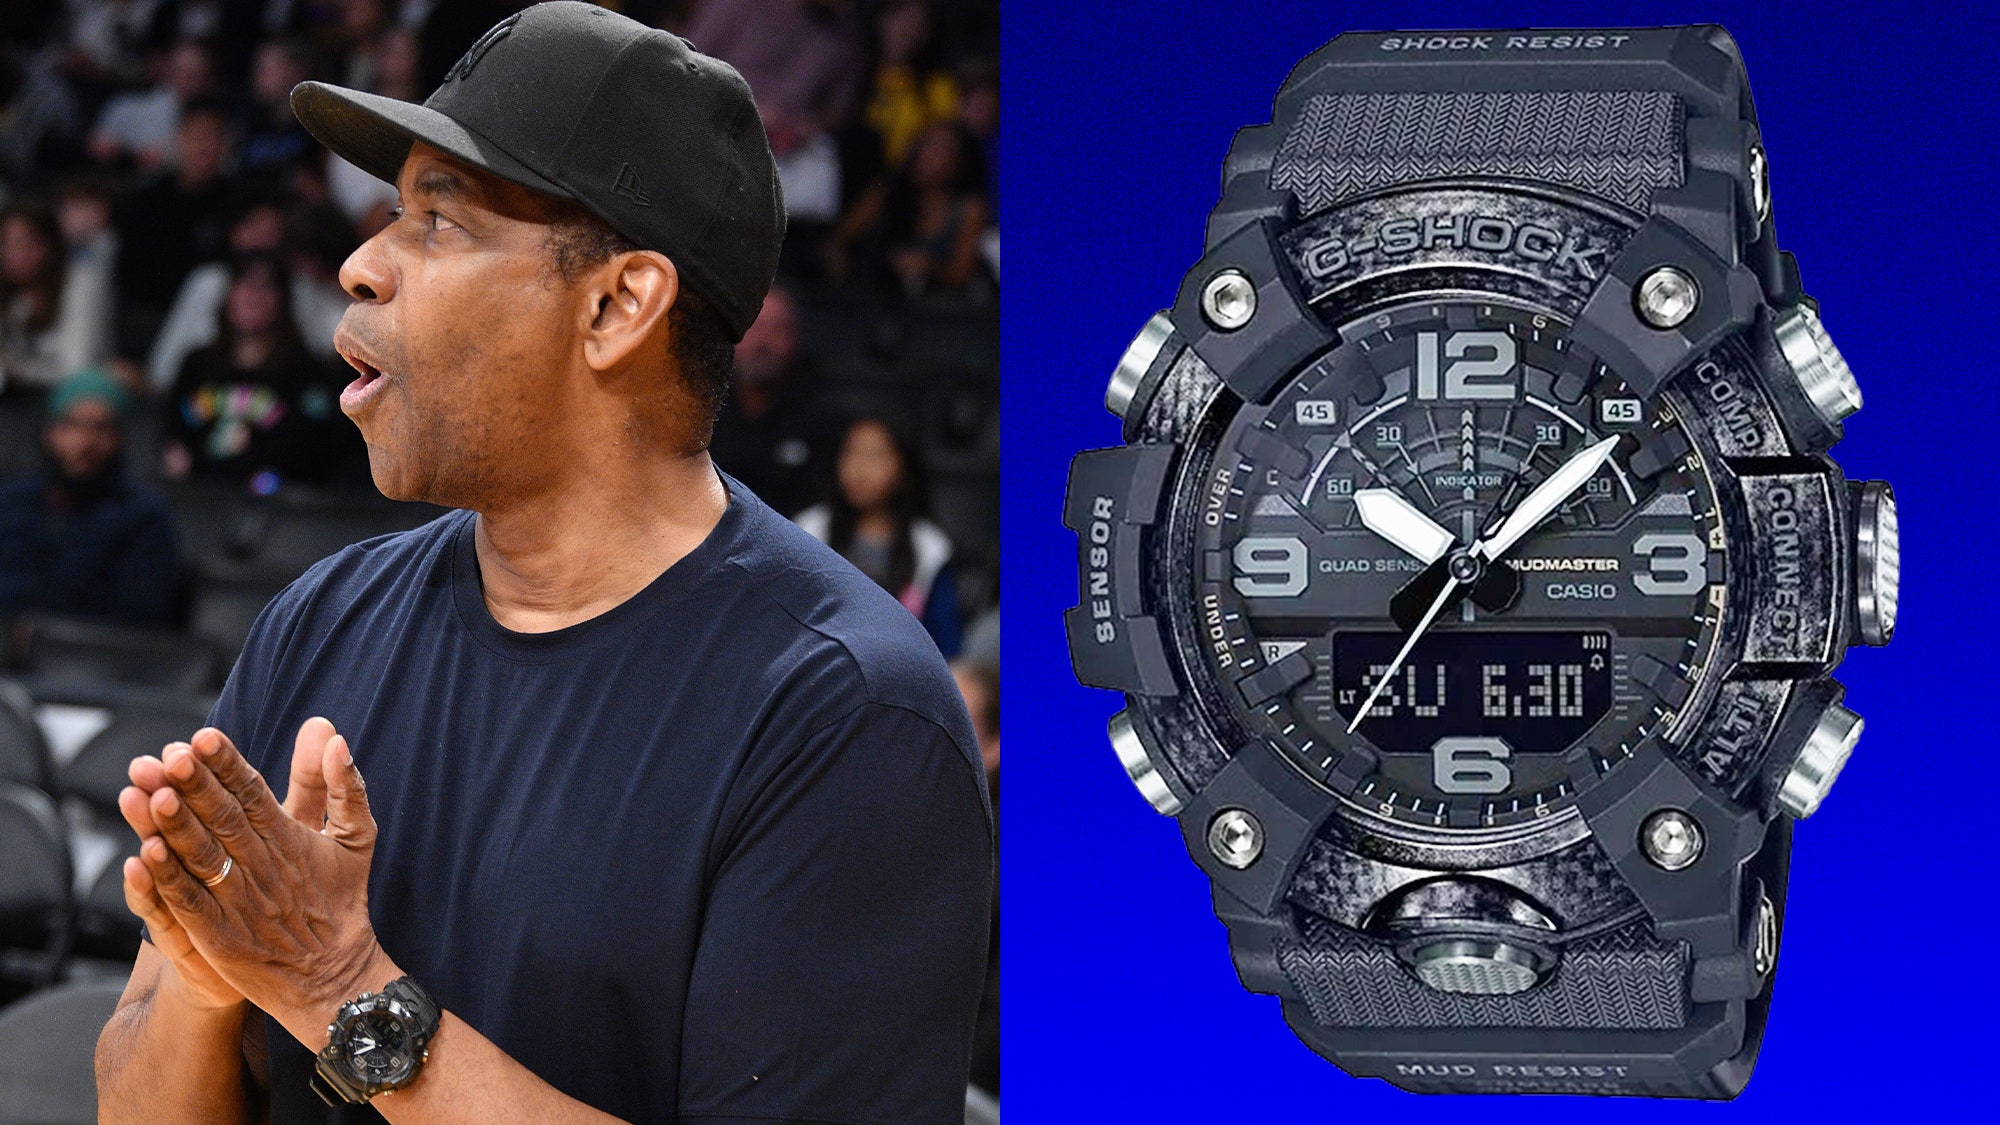 denzel-washington-is-the-patron-saint-of-affordable-watches